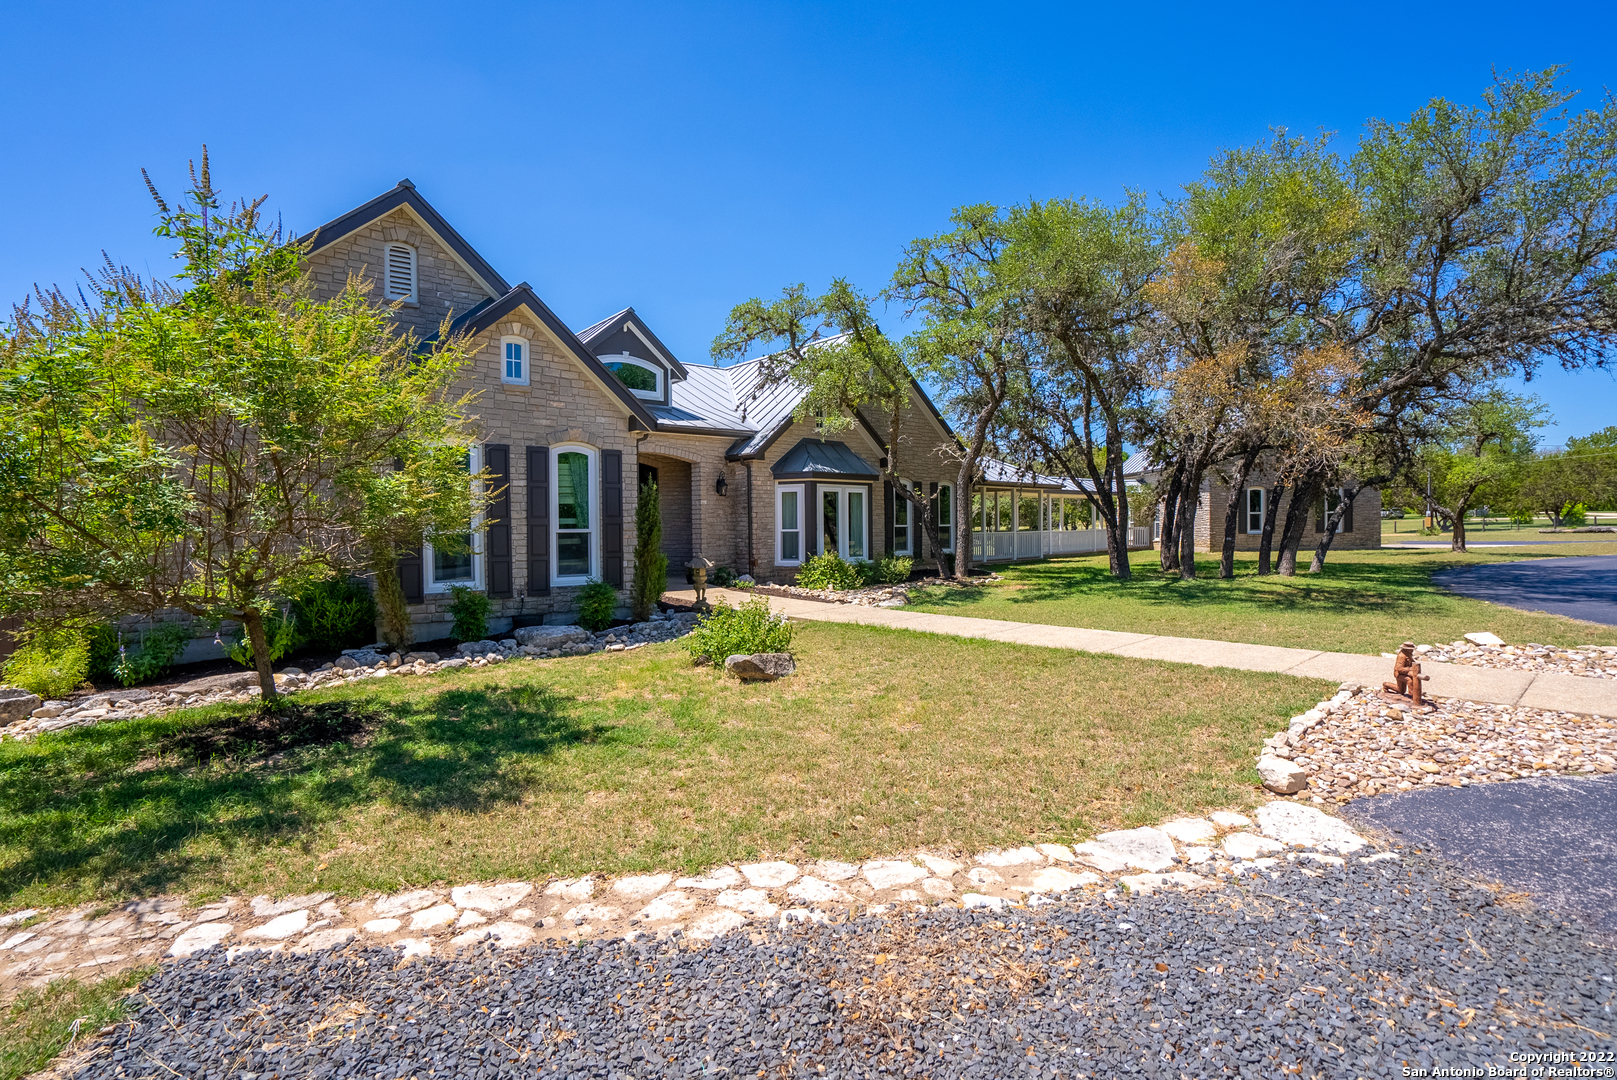 Hill Country Beauty - Welcome to this rare find in the Texas Hill Country.  No expense was spared in the building of this custom beauty.  One can find custom lighting and ceilings trimmed with 6inch crown molding.  A massive sunken family room is welcoming at the entry of this home.  Large windows show off the view of the 2-year-old heated pool/spa and in the evening deer can be spotted grazing among the trees. Off the family room is the private bar area with lots of cabinet space, wet sink, a wine cooler and hook-up for an ice maker. The gourmet kitchen comes right from a chef's dreams with custom cabinets, custom lighting, leathered granite countertops, and large stainless double Thermador ovens.  The master bedroom suite is truly a private escape with French door access to the pool.   More custom touches can be found in the master ensuite with the cultured marble-clad snail shower, whirlpool bath plus his n her walk-in closets.  Two of the secondary bedrooms have their own attached full bathrooms.  The half bath sports a custom onyx hand-carved sink. Two covered patios are provided for entertainment.  A covered breezeway leads the way to the triple-car garage.  Above the garage is an unfinished 14ftx32ft loft area waiting to be converted into extra living space or added income. This beauty sits on about 5.63  acres of partially fenced land with Ranger creek flowing through the back side of the property. See additional documents for list of updates/upgrades.  Pre-Qualification required, at request of seller, prior to showing.